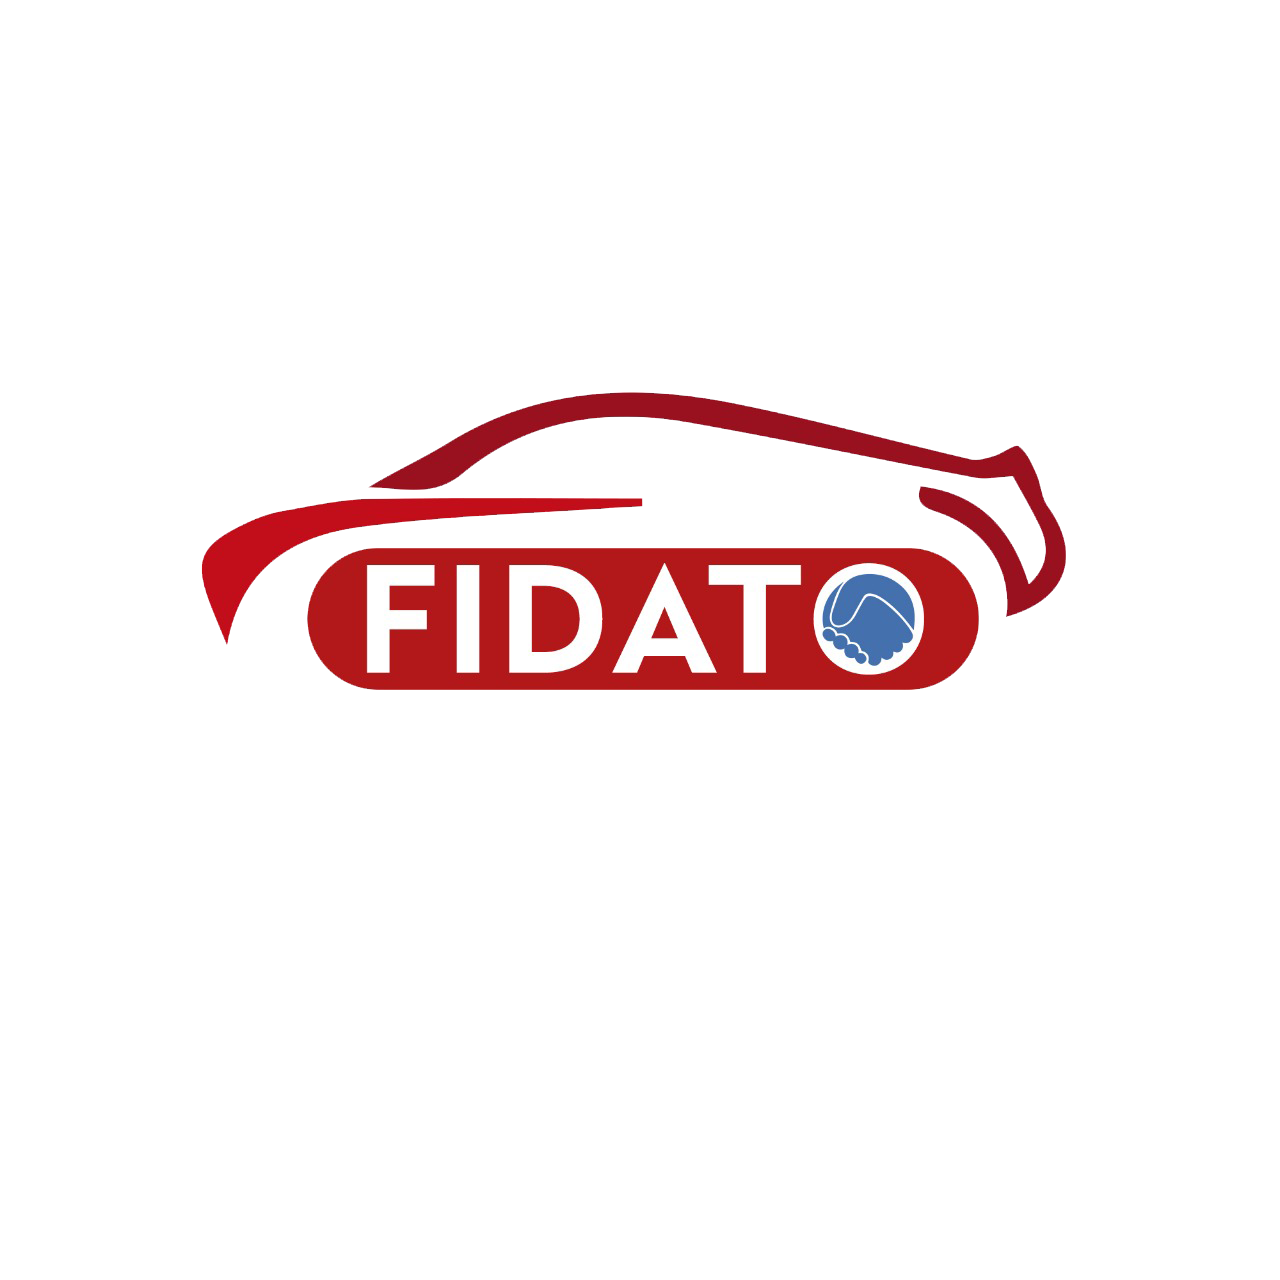 Fidato Car Services - Your One-Stop Shop for Car AC Repair